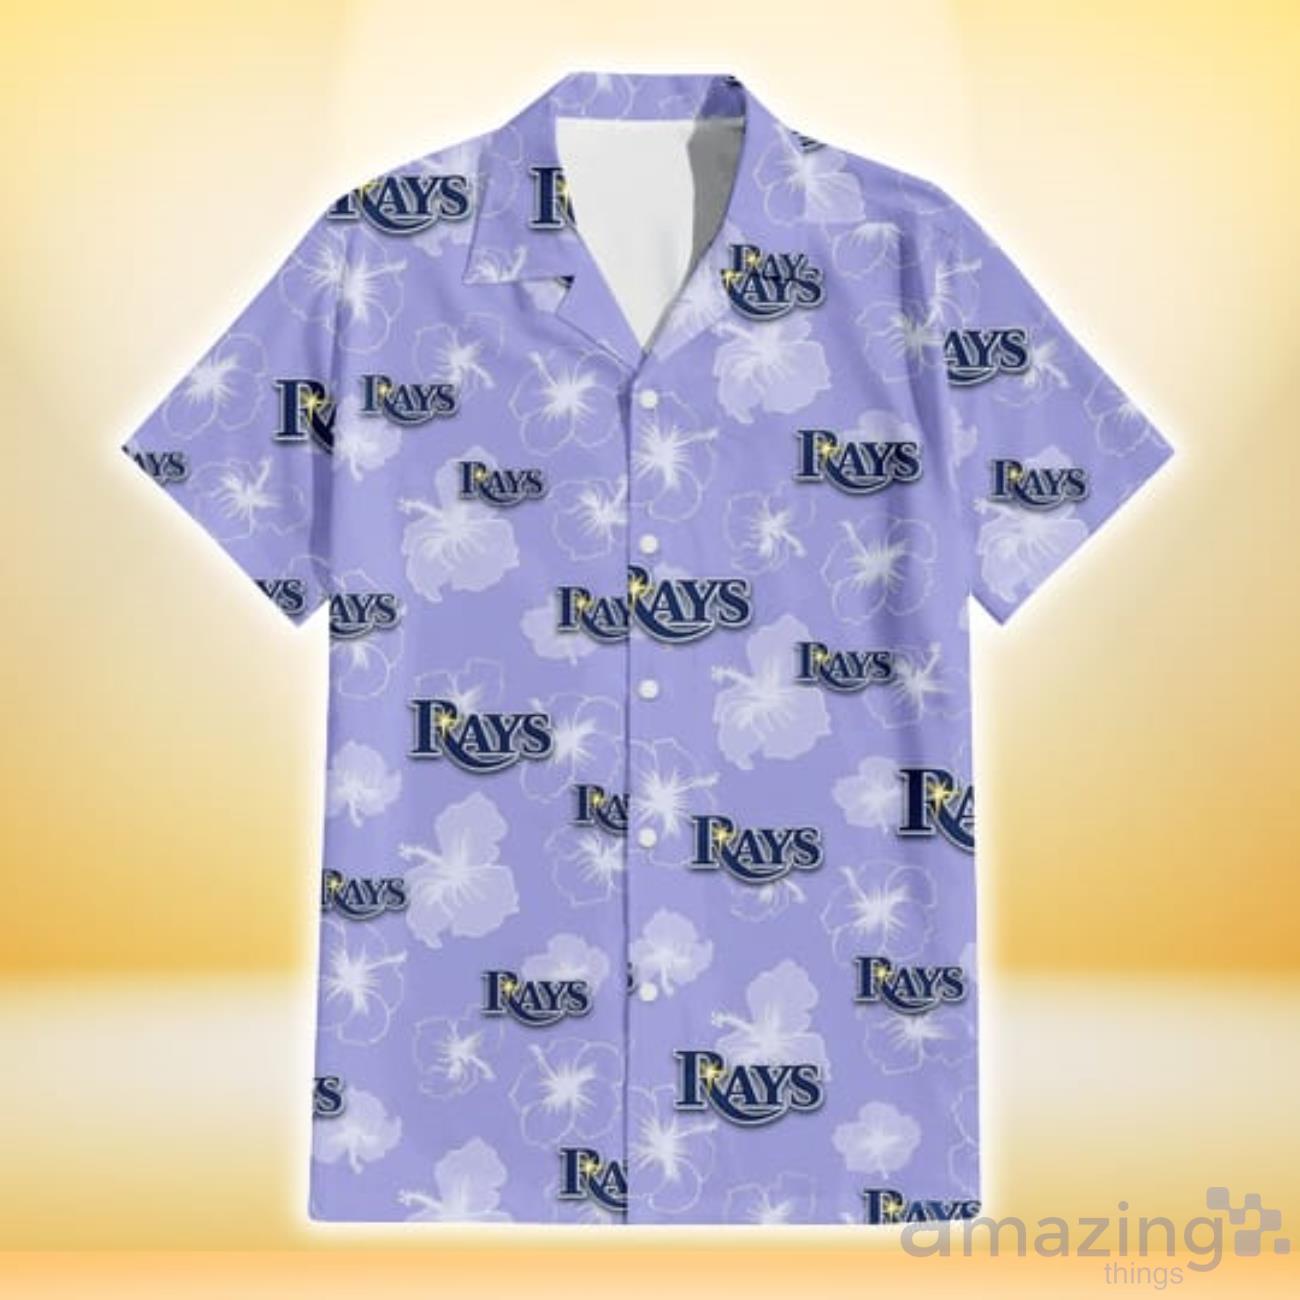 Tampa Bay Rays White Hibiscus Ceramic Style Navy Background 3D Hawaiian  Shirt Gift For Fans - Freedomdesign